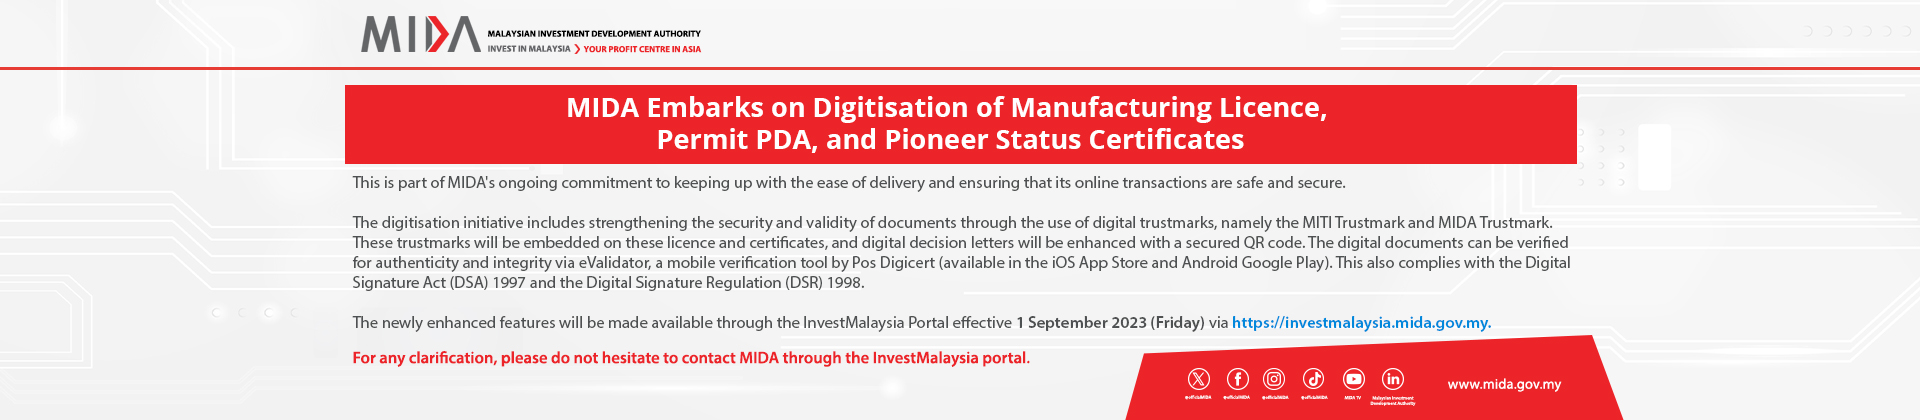 MIDA Embarks on Digitisation of Manufacturing License, Permit PDA, and Pioneer Status Certificates